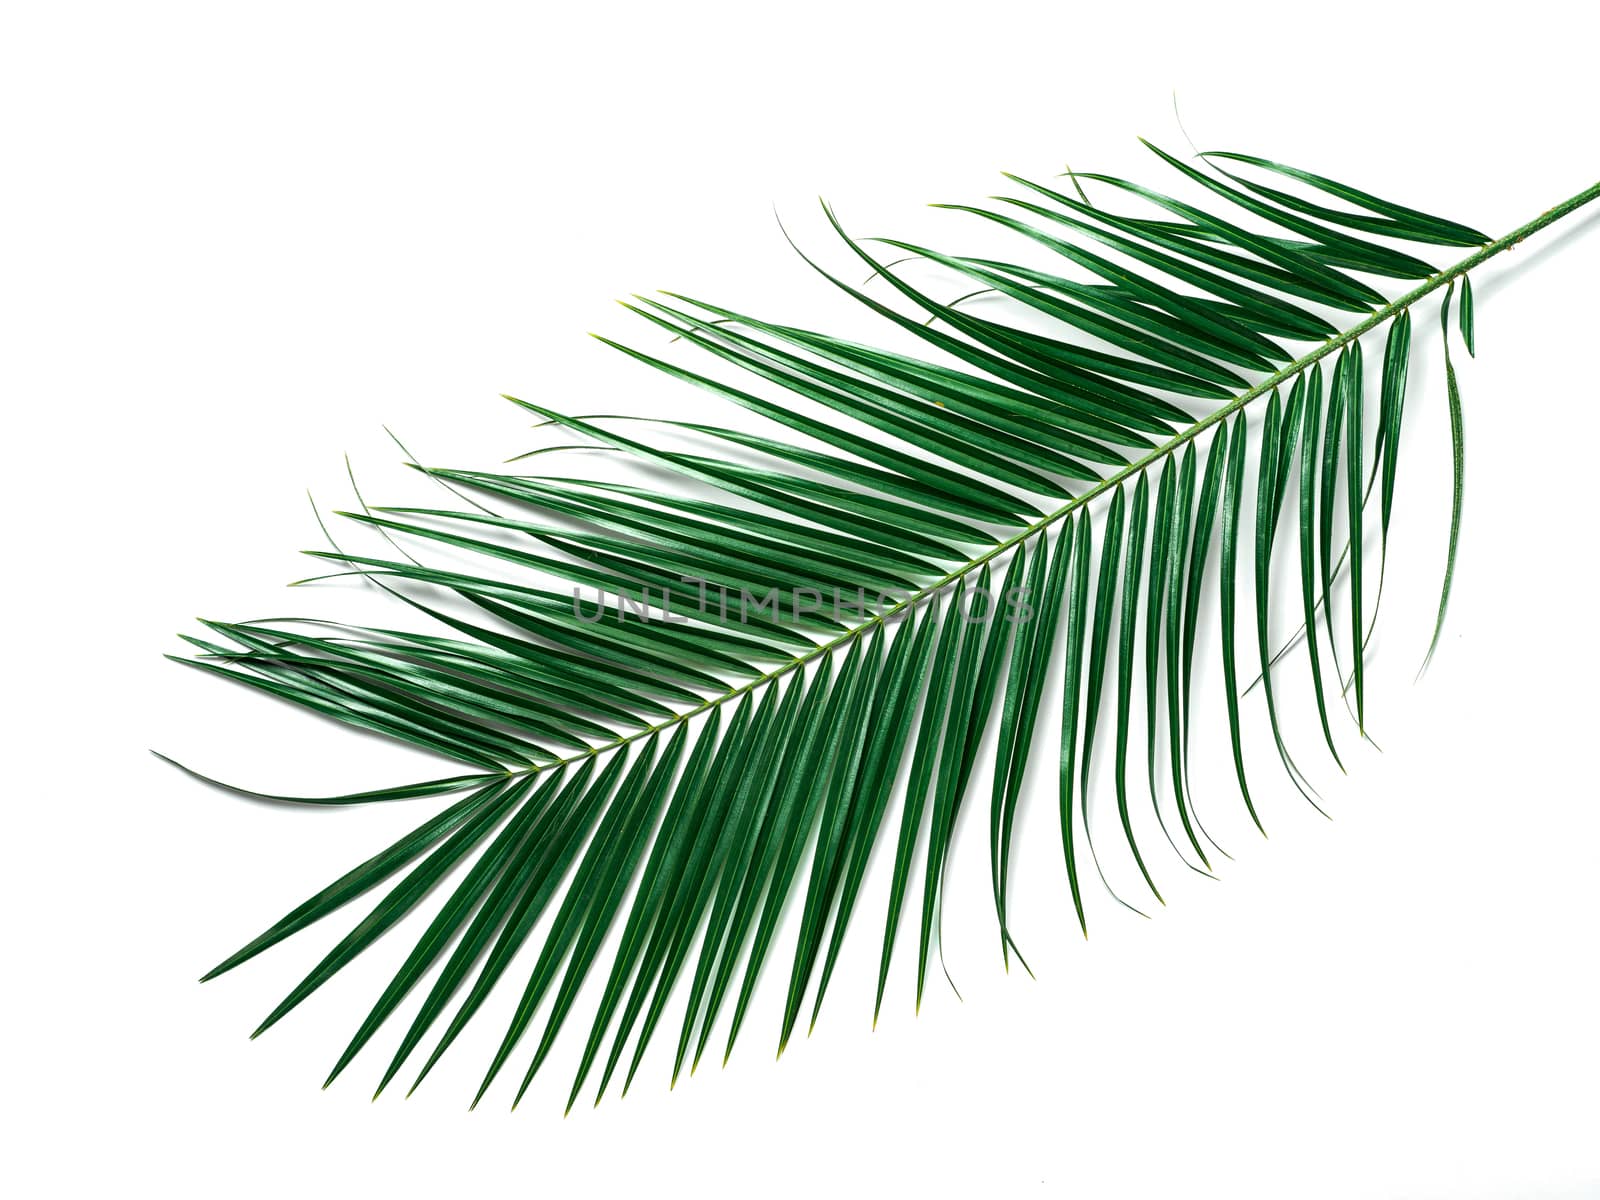 Palm leaves isolated on white background. Tropical palm leaves top view or flat lay. Copy space for text or design. Tropical palm leave, jungle leave floral pattern background